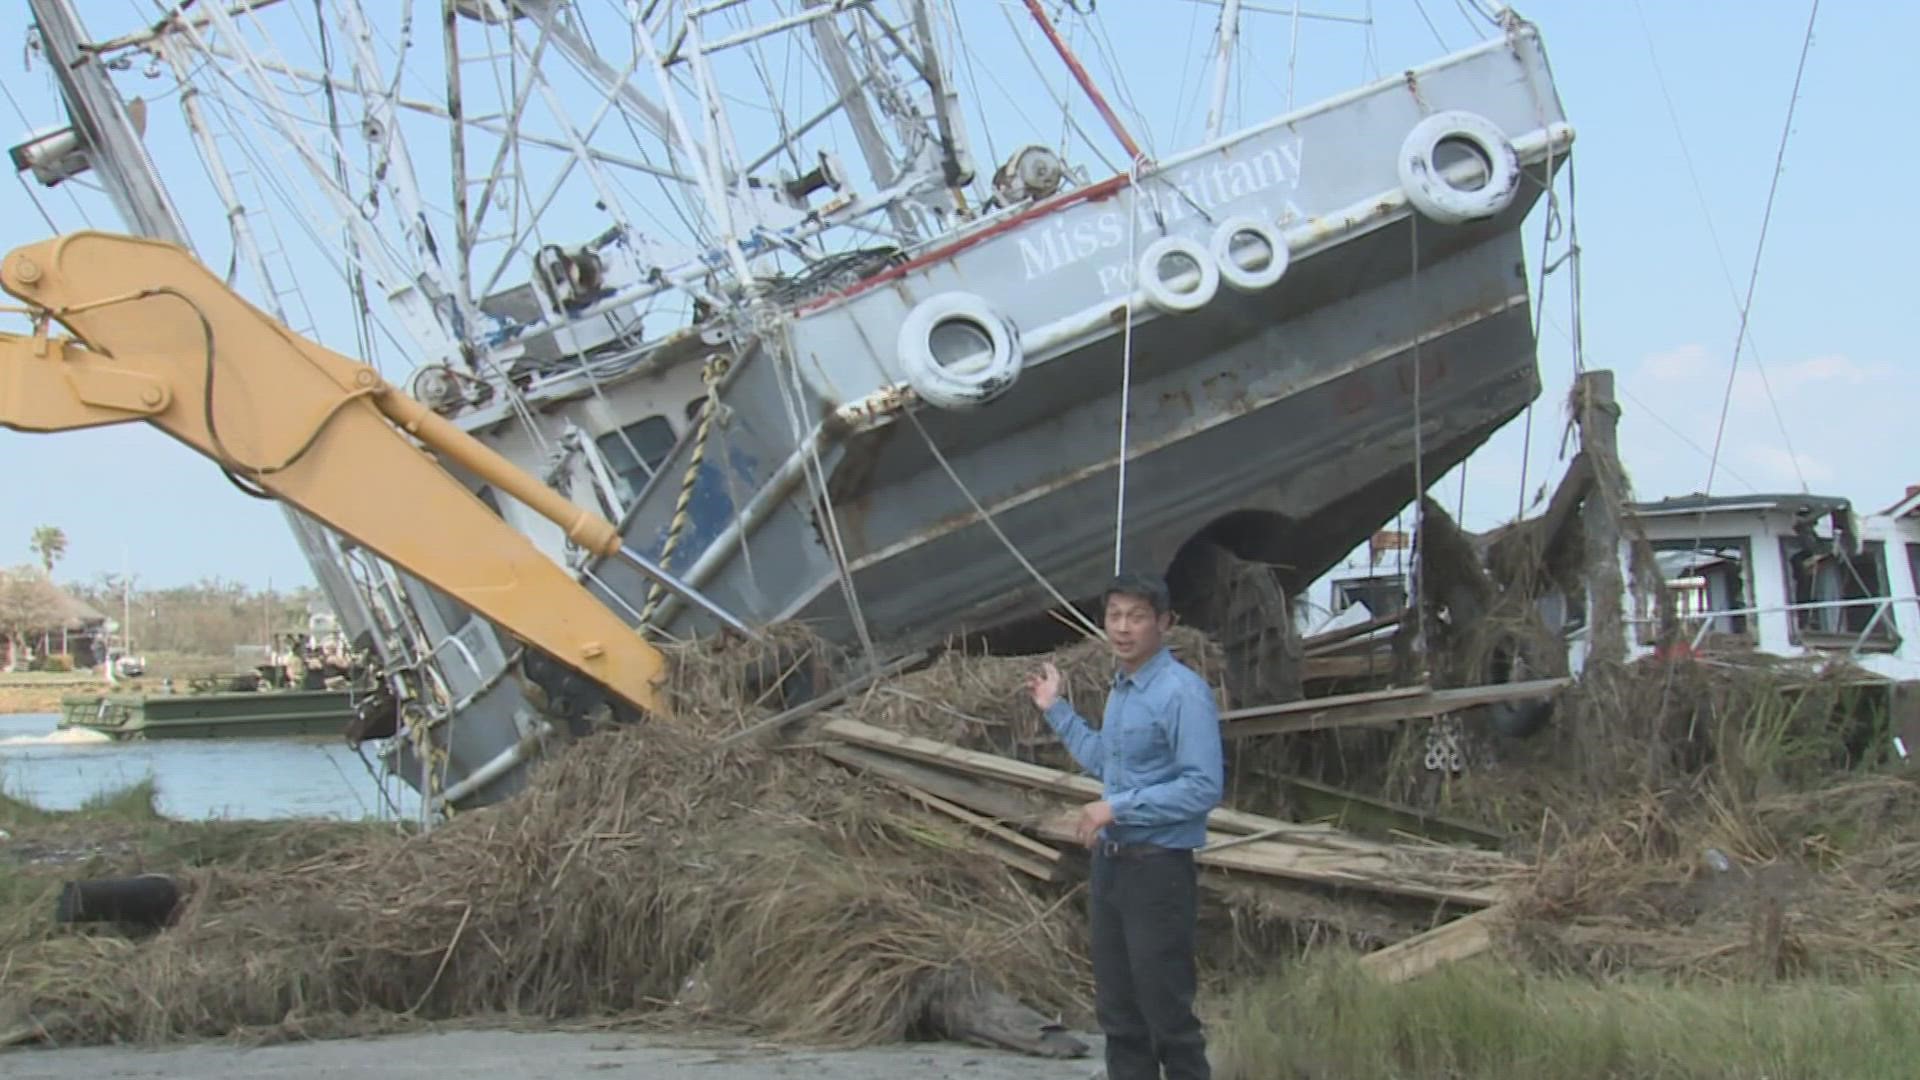 Thanh Truong traveled by boat to Grand Isle to report on the damage.